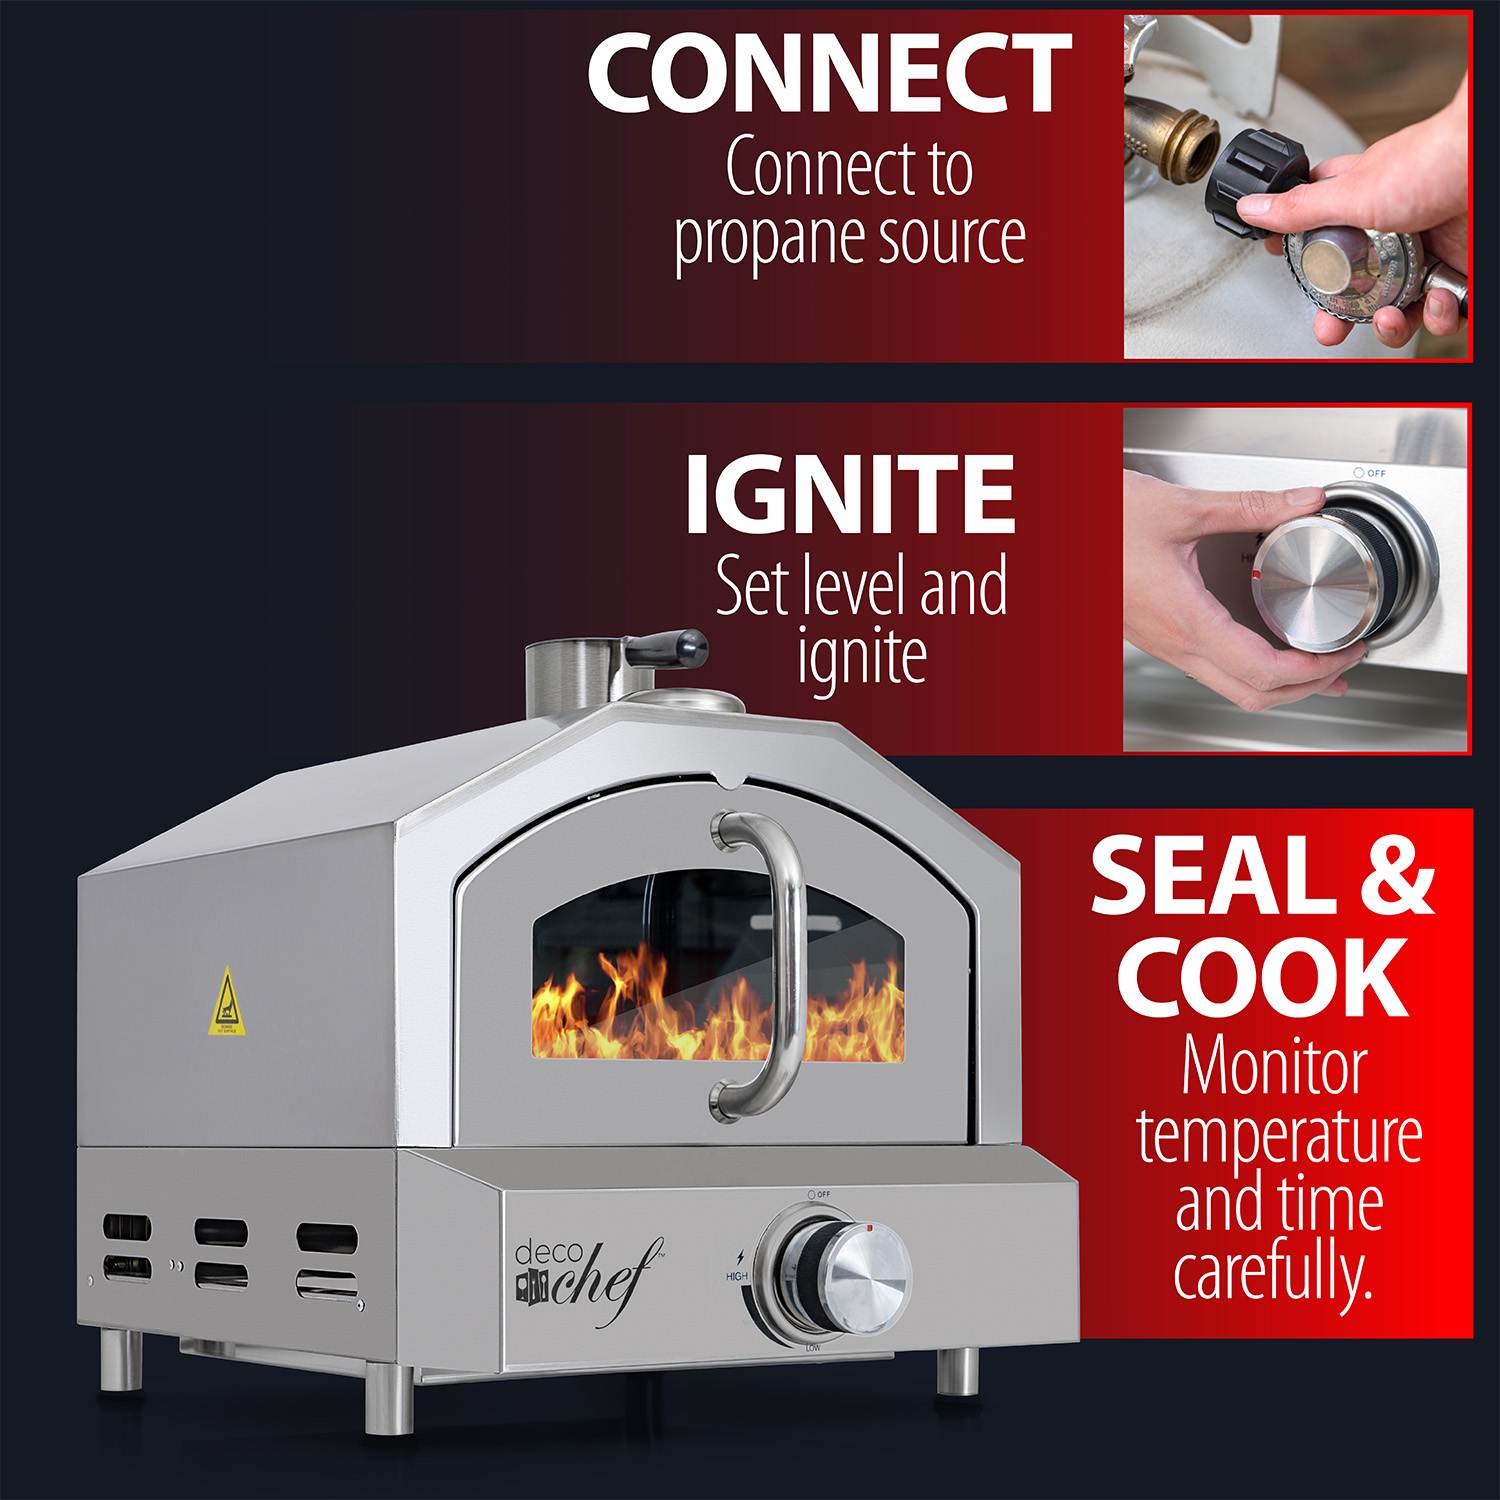 Deco Chef Portable Outdoor Pizza Oven and Grill with Propane Gas CSA Approved Regulator and Hose, Includes Pizza Peel, Stone, Easy Temperature Dial, Built-In Thermometer, and Grill Rack - image 3 of 11